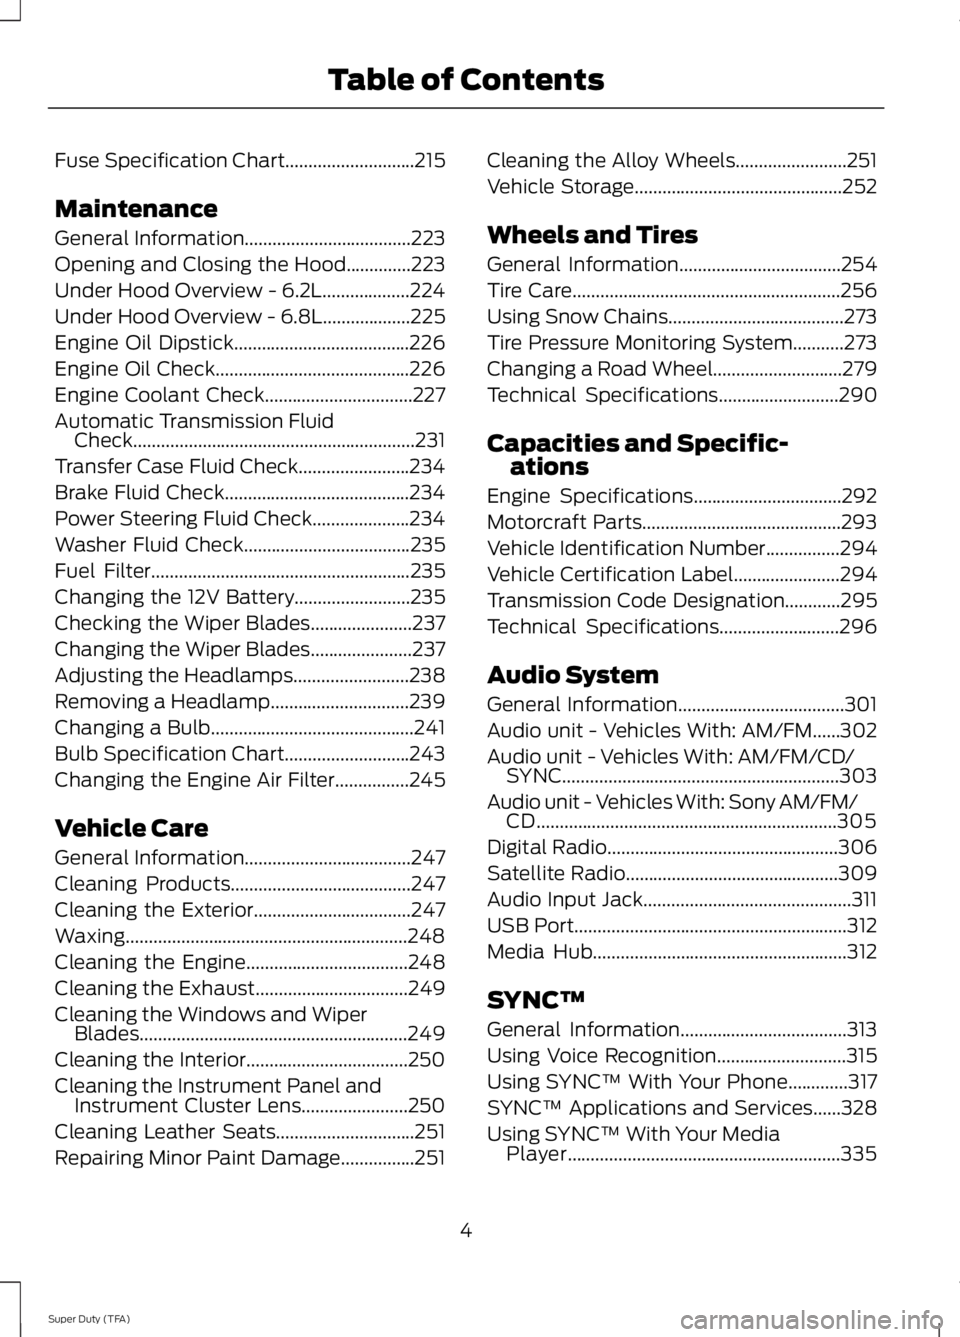 FORD F250 SUPER DUTY 2014  Owners Manual Fuse Specification Chart............................215
Maintenance
General Information....................................223
Opening and Closing the Hood..............223
Under Hood Overview - 6.2L.